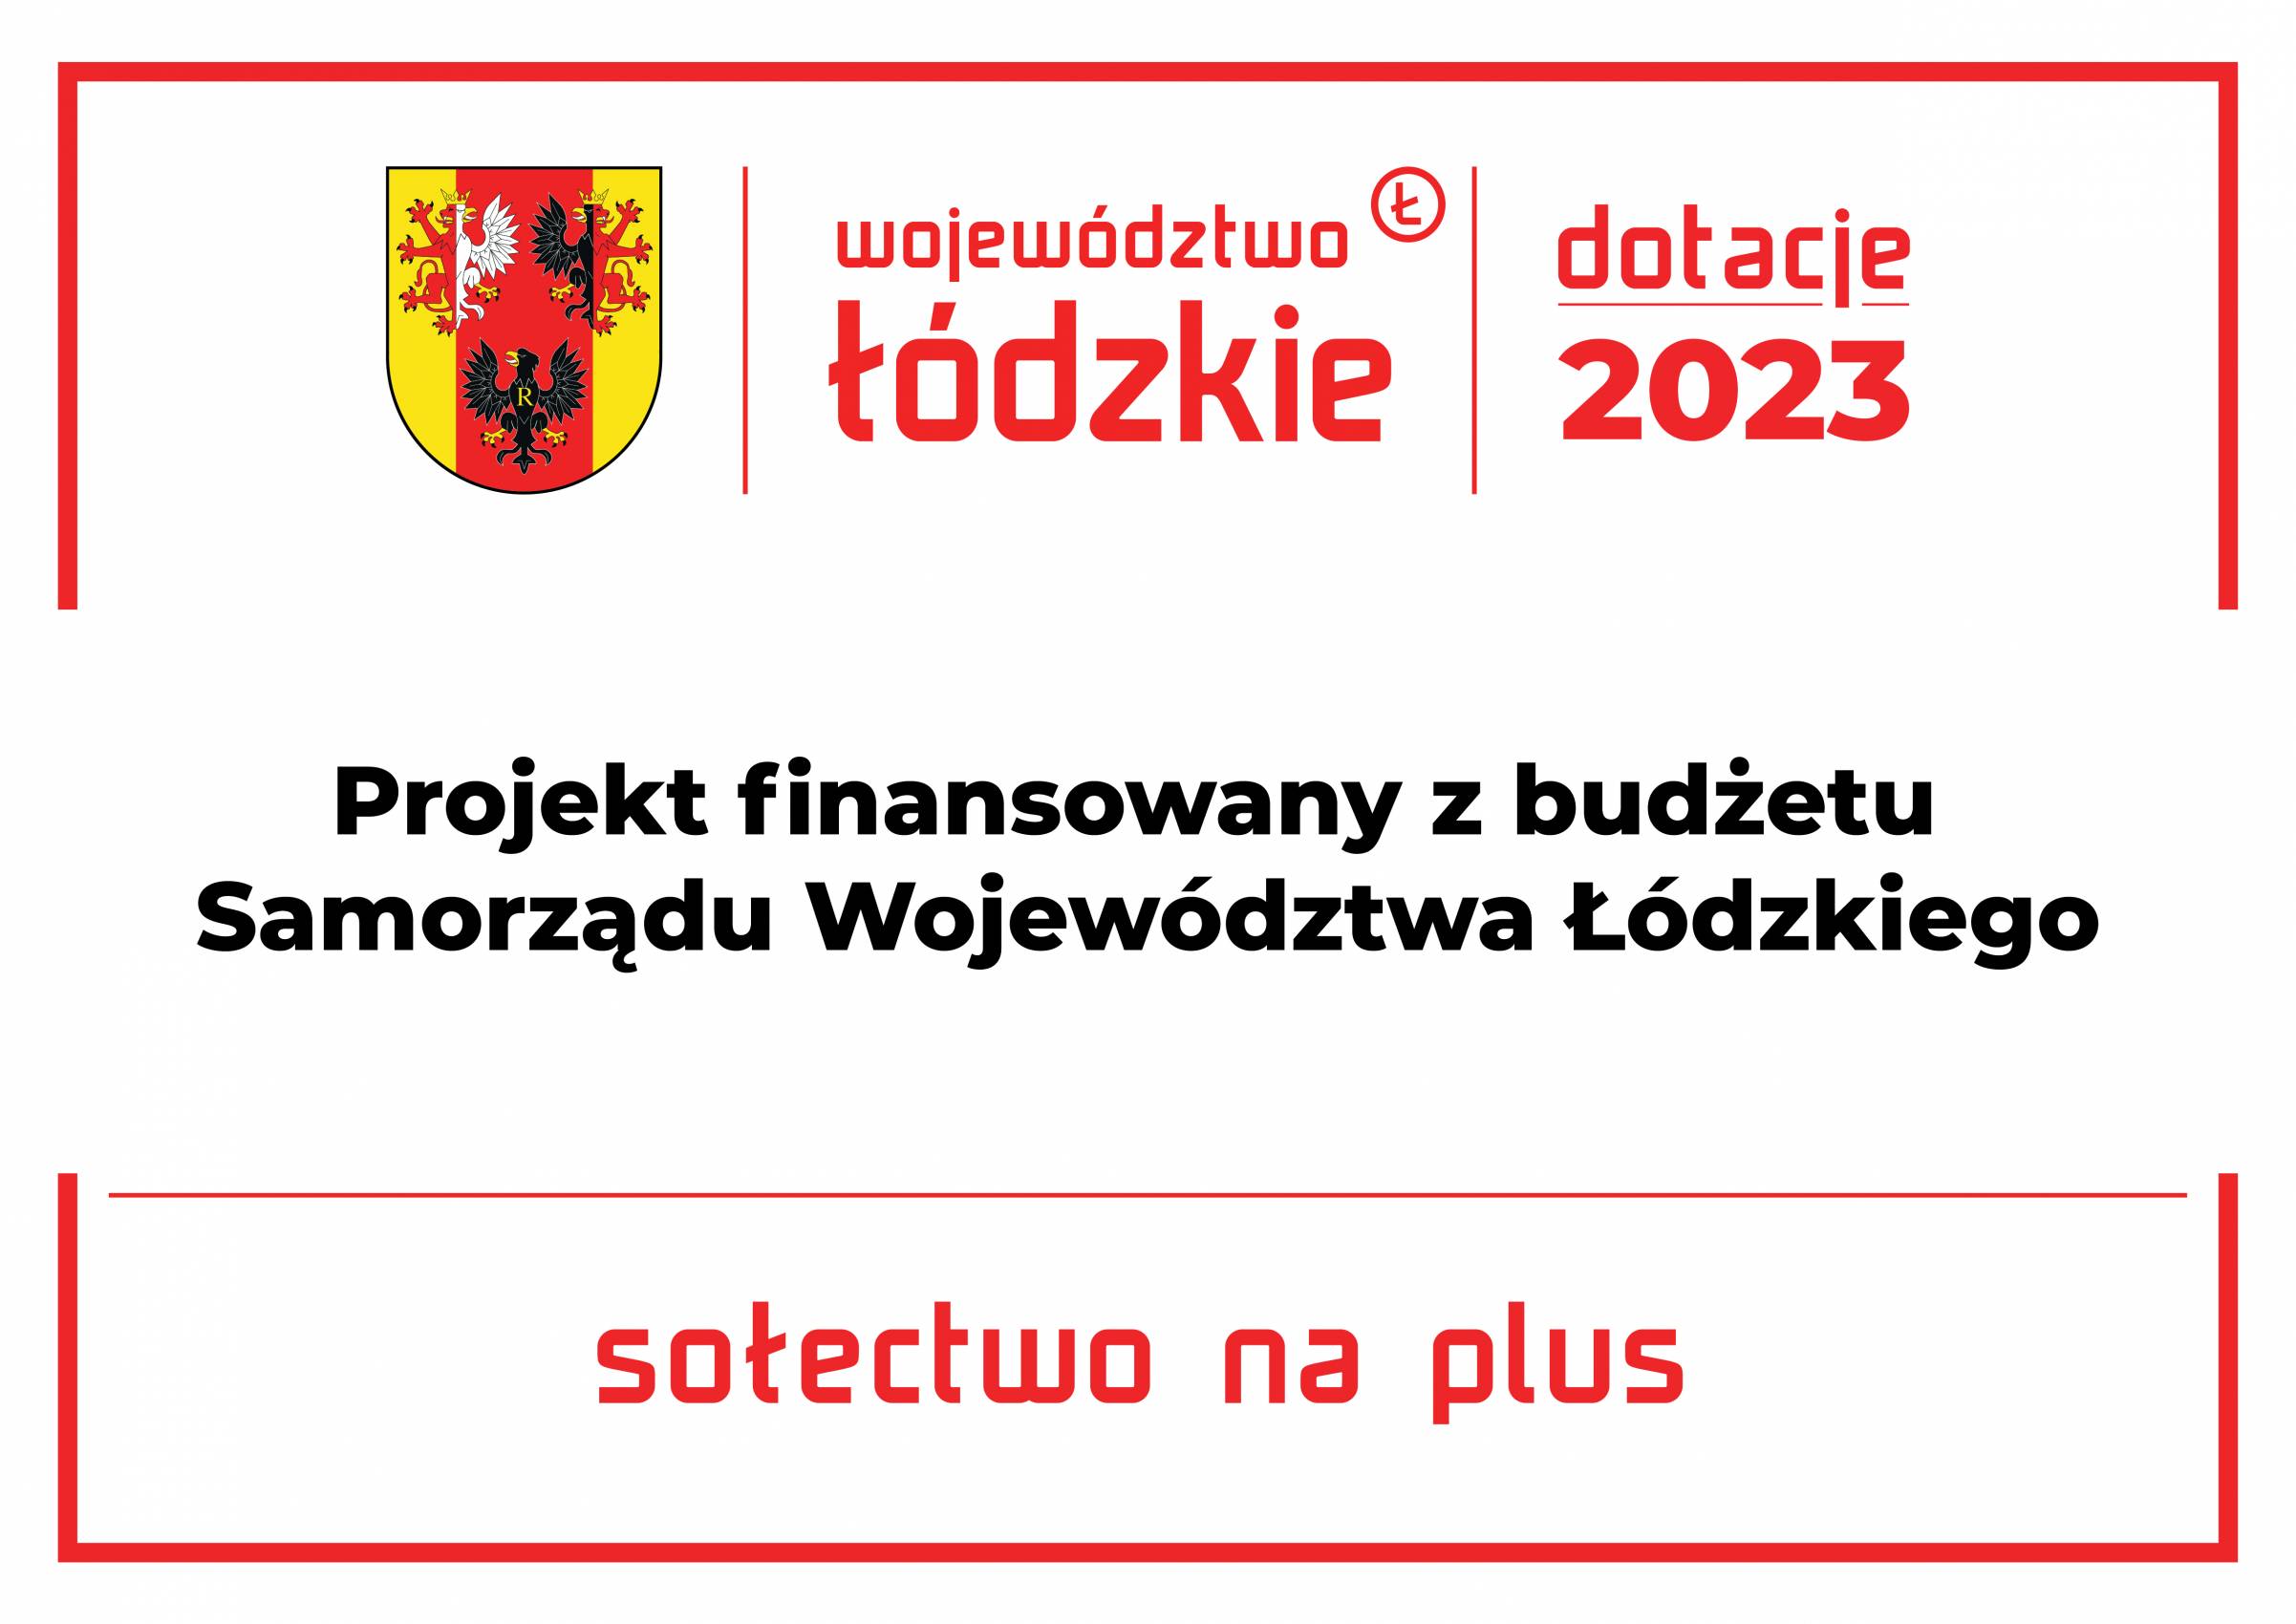 Dotacje_2023_Tablice_Solectwo_na_Plus_finans